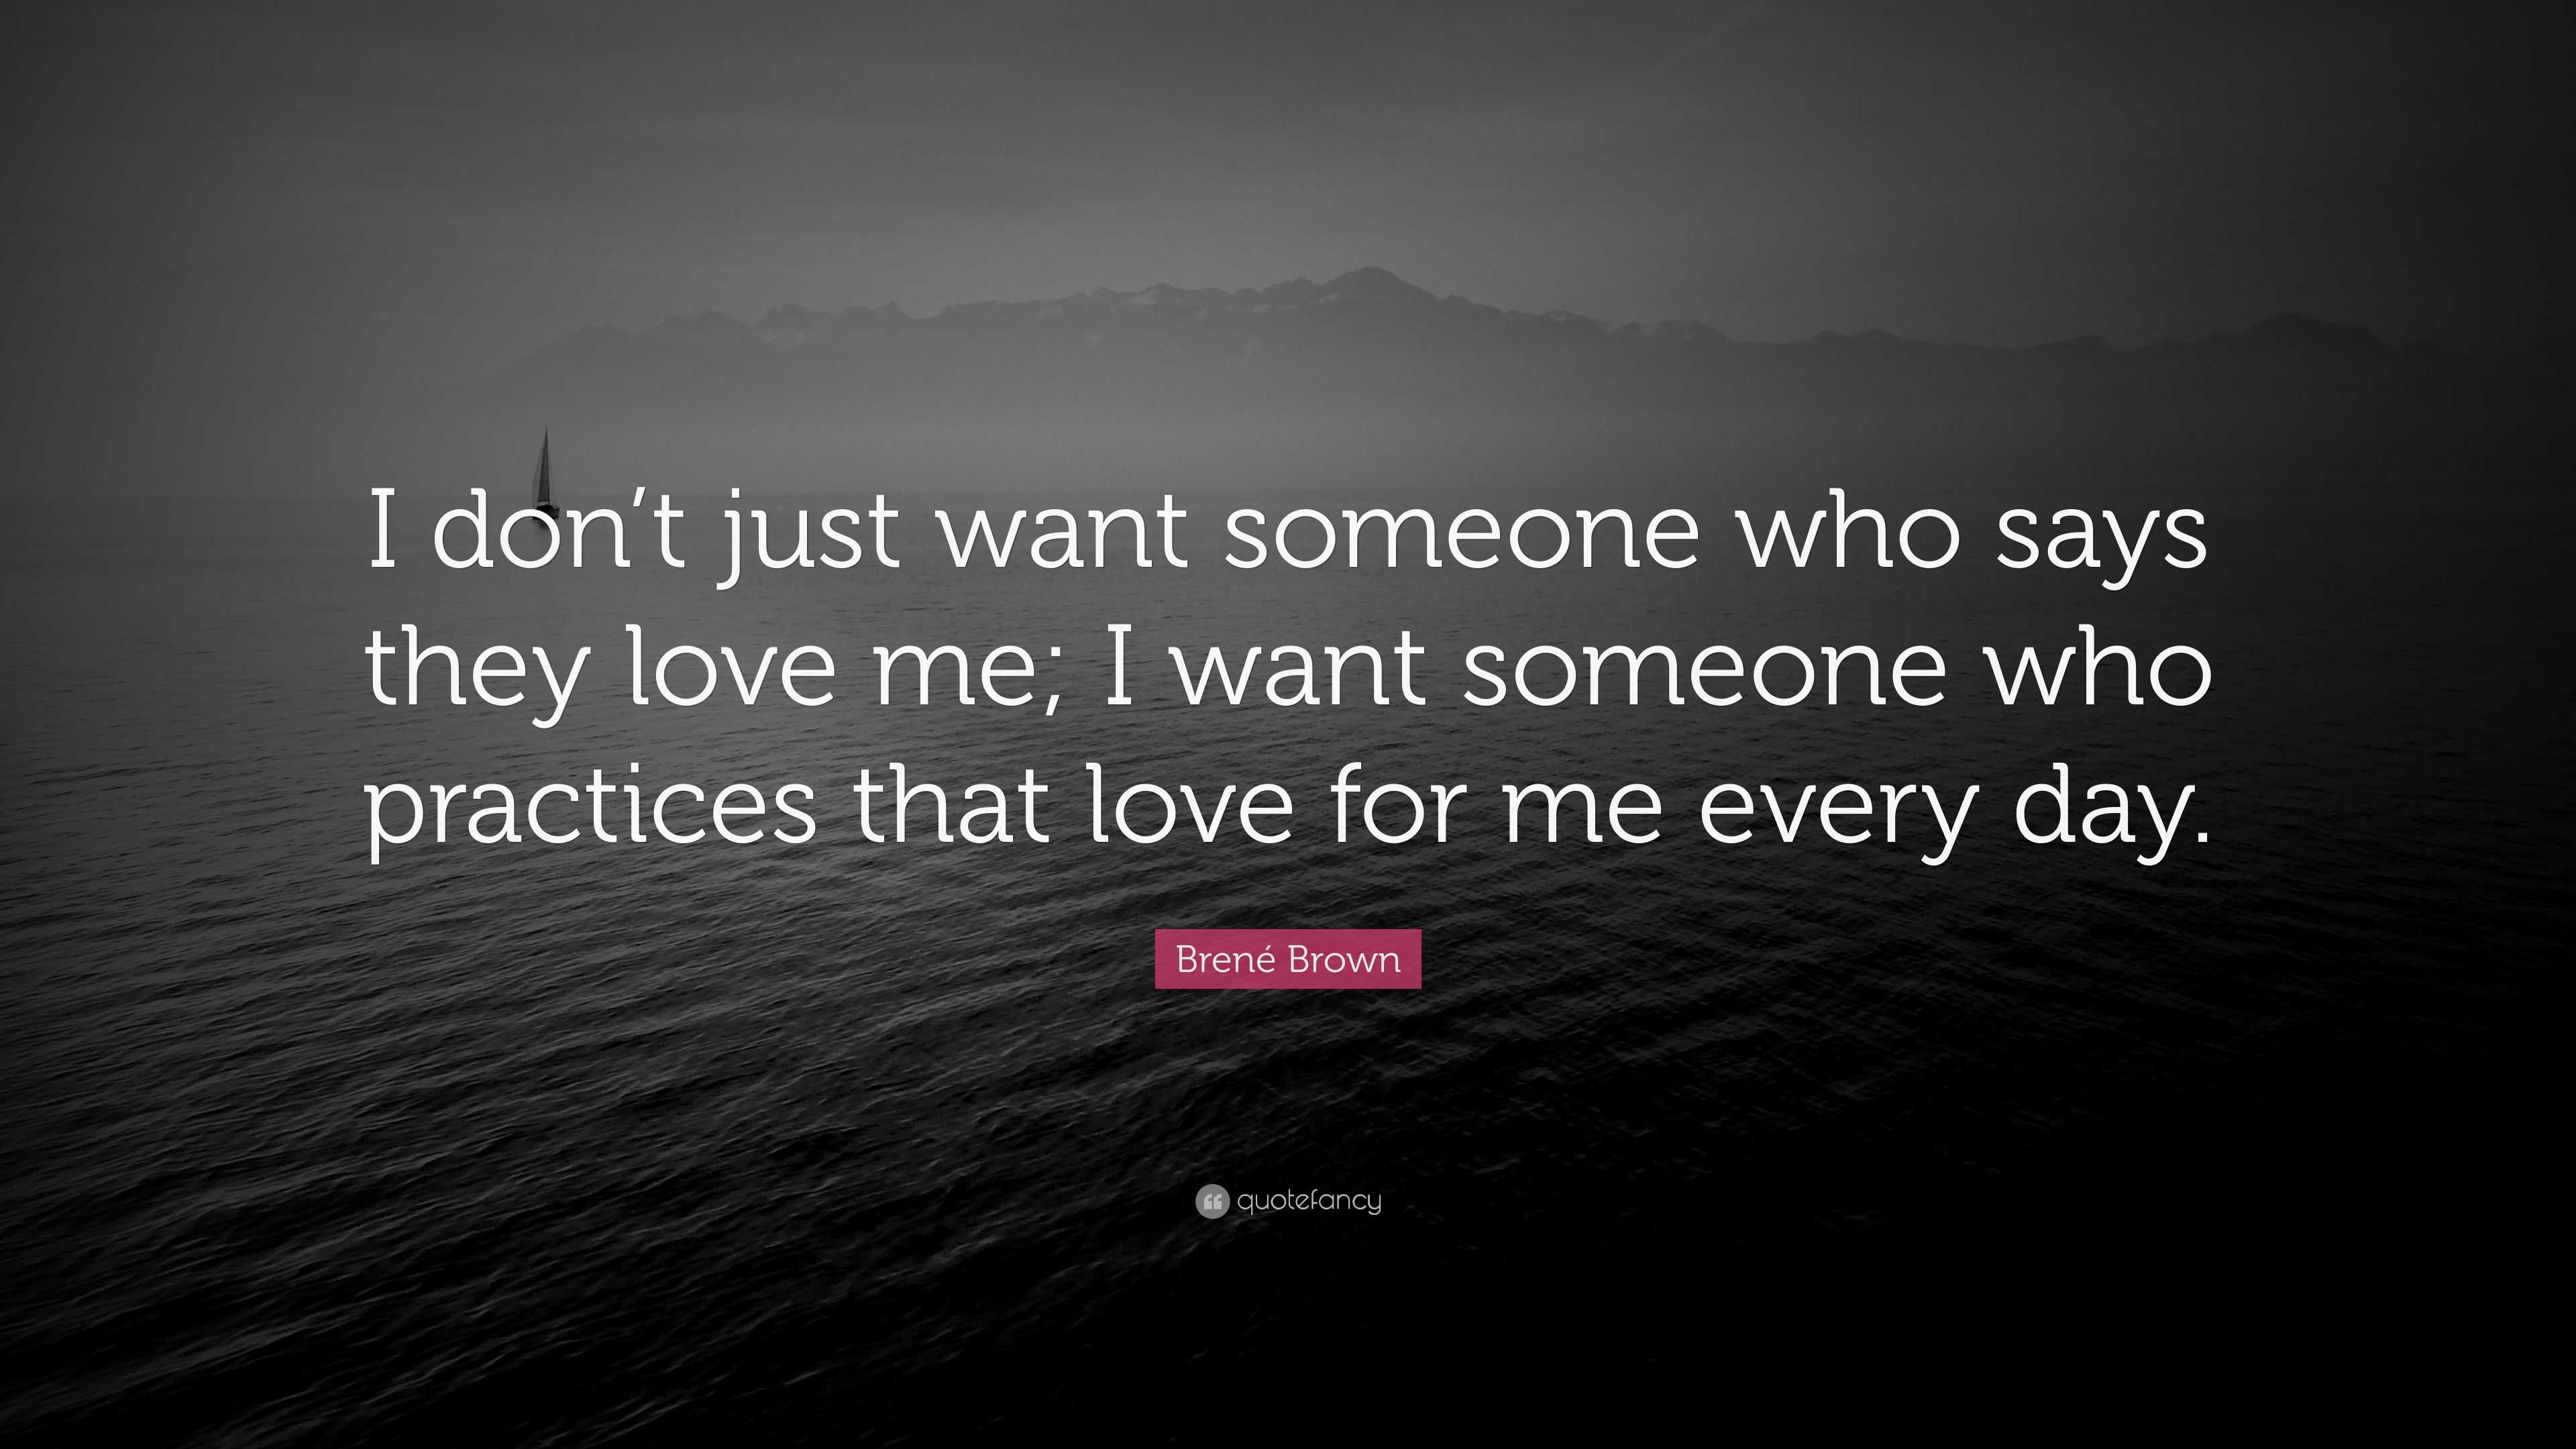 Brené Brown Quote “I don t just want someone who says they love